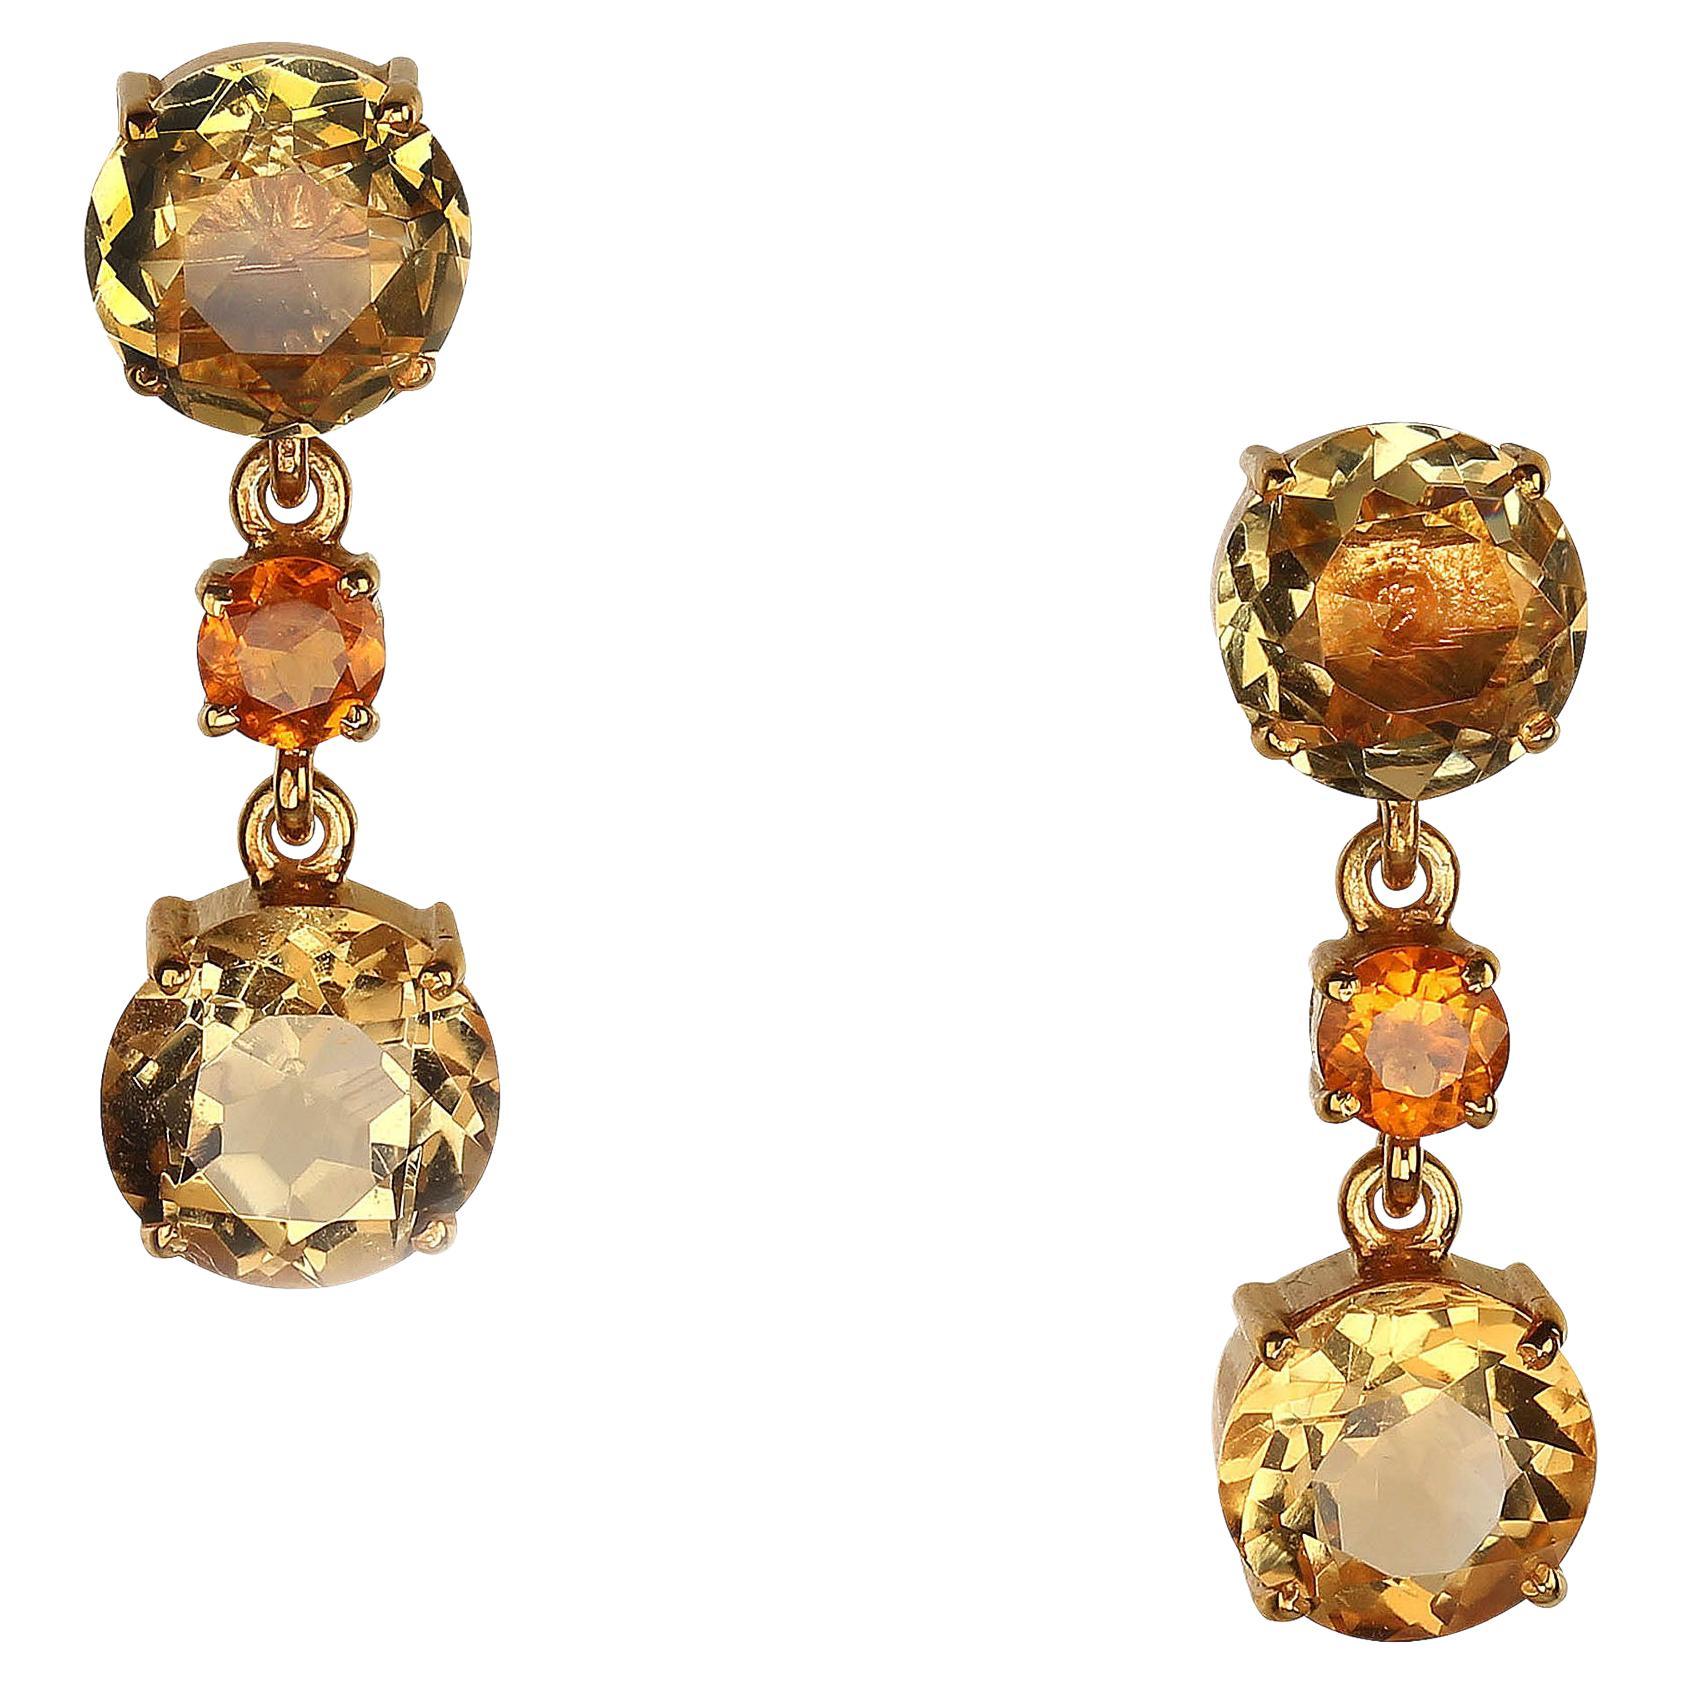 AJD Citrines and More Citrines Dangle Earrings in Gold